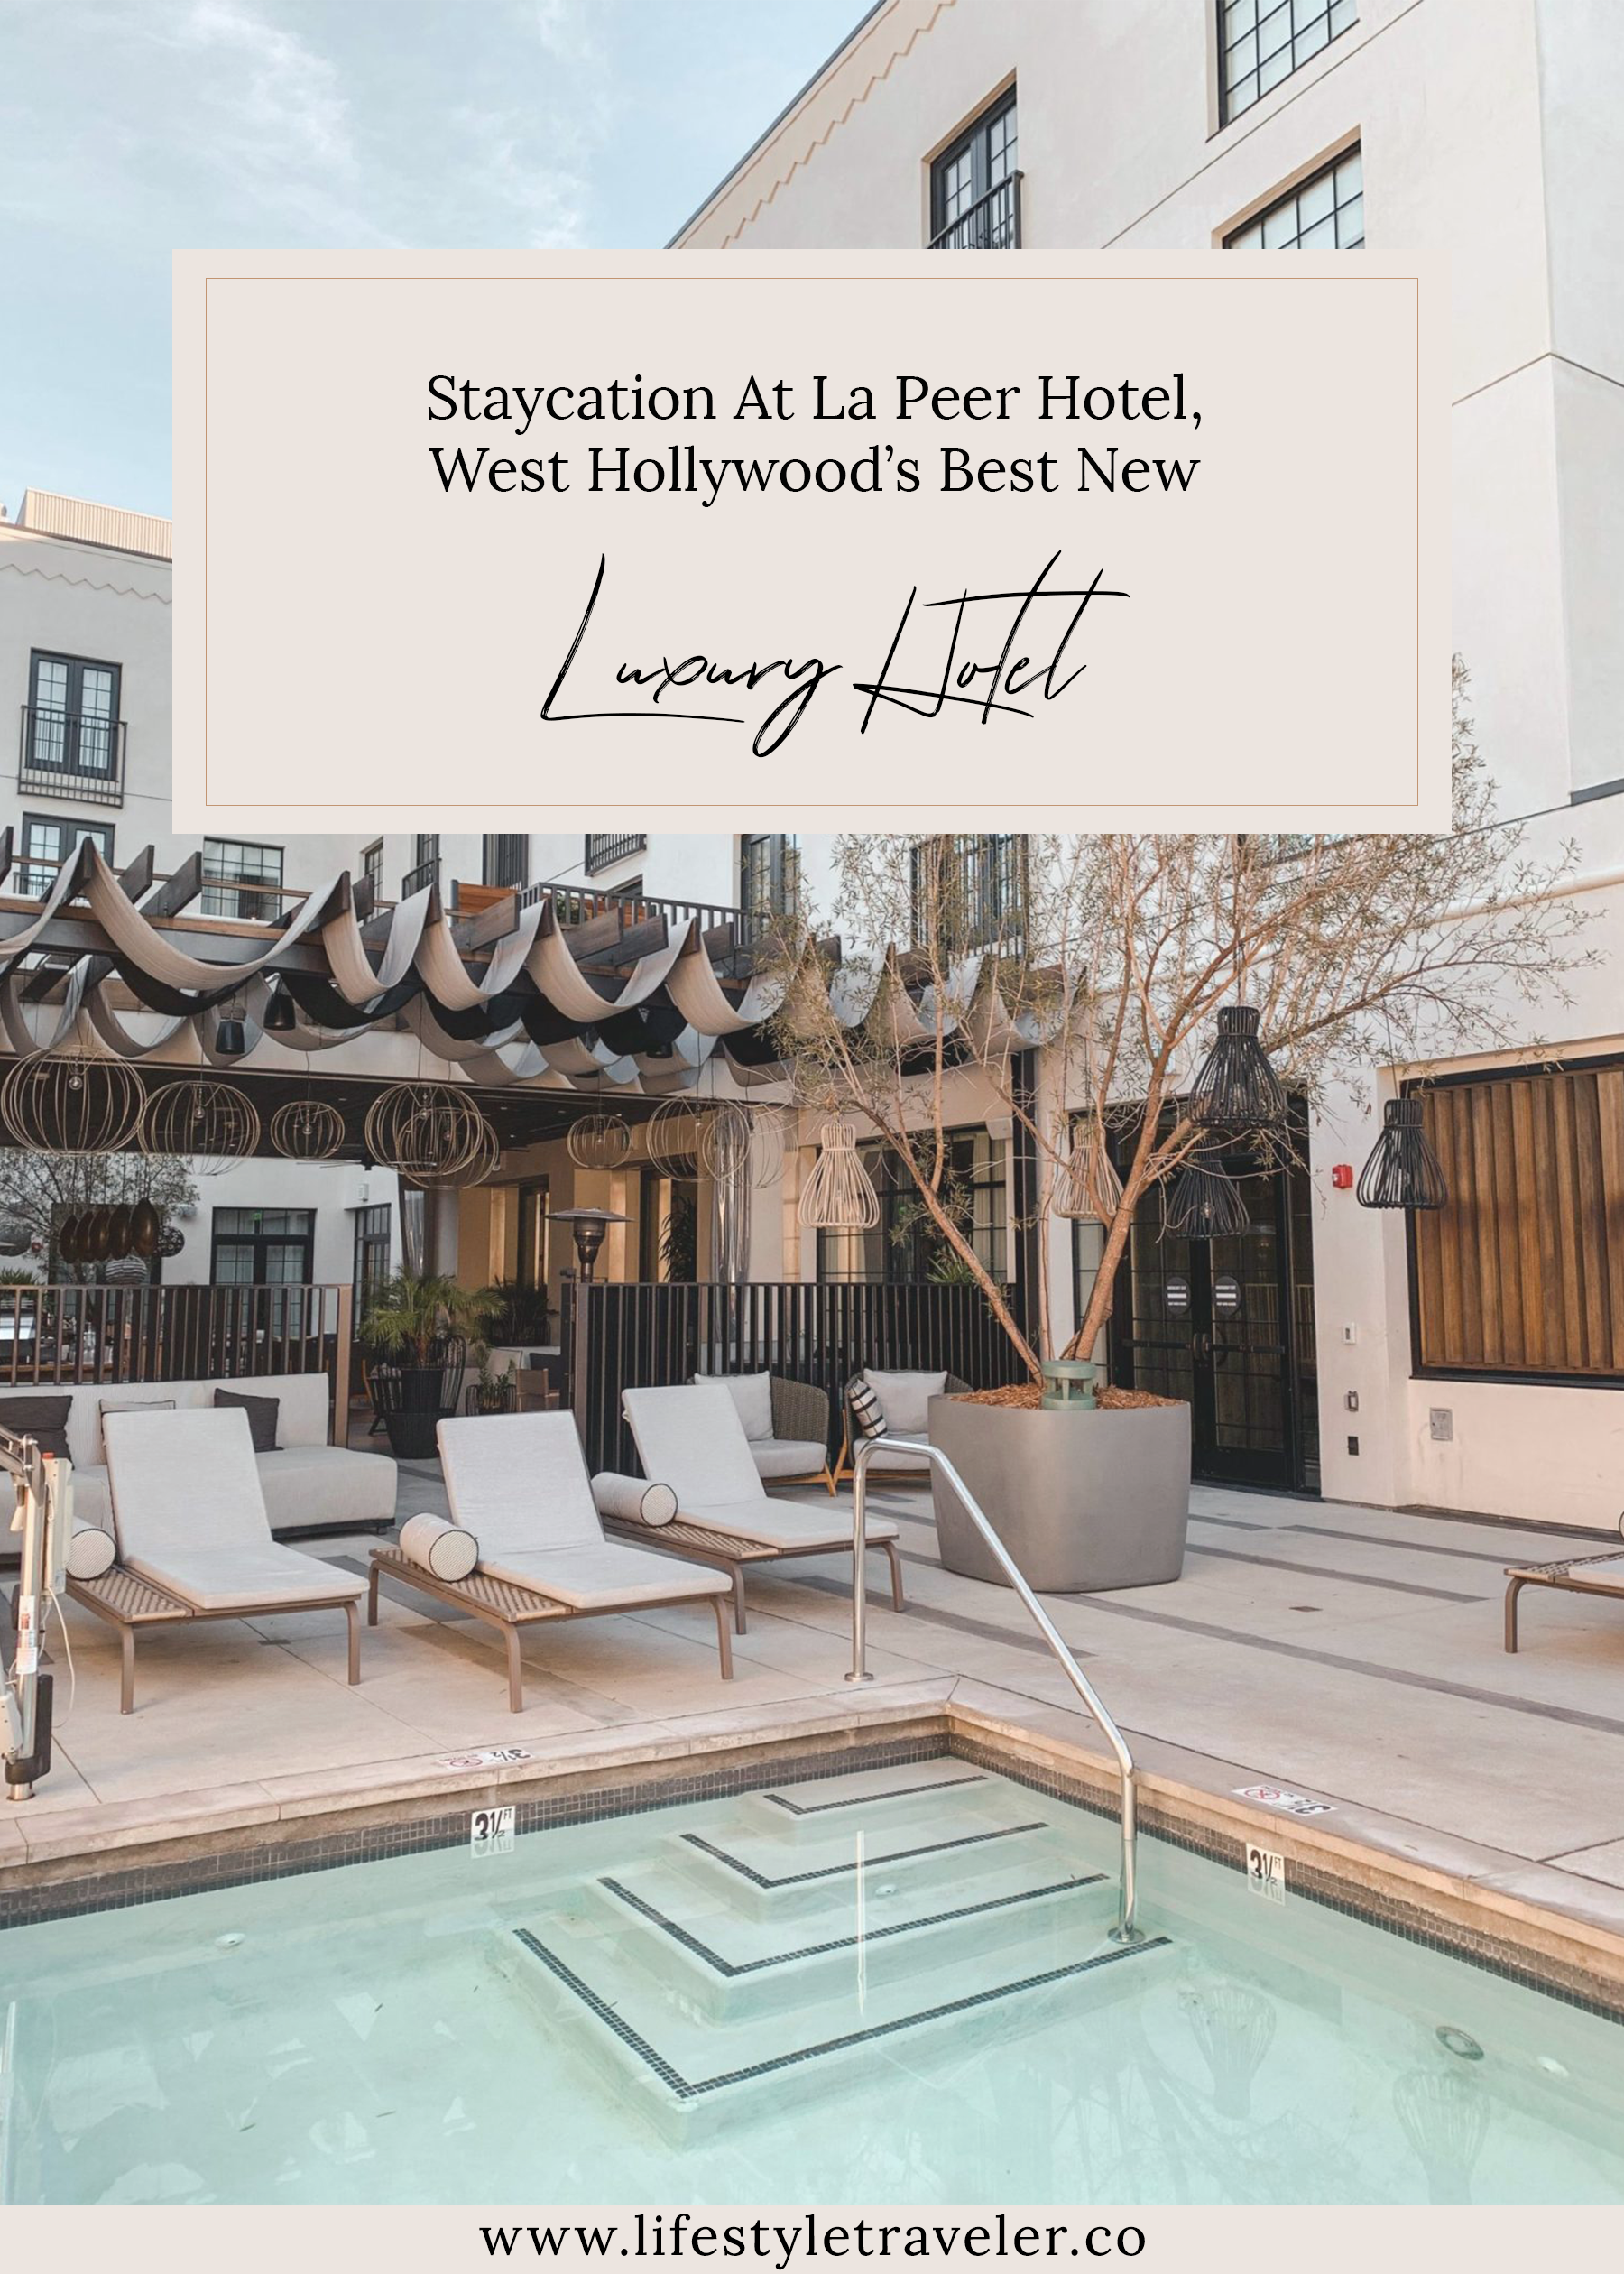 West Hollywood’s Best New Luxury Hotel | lifestyletraveler.co | IG: @lifestyletraveler.co